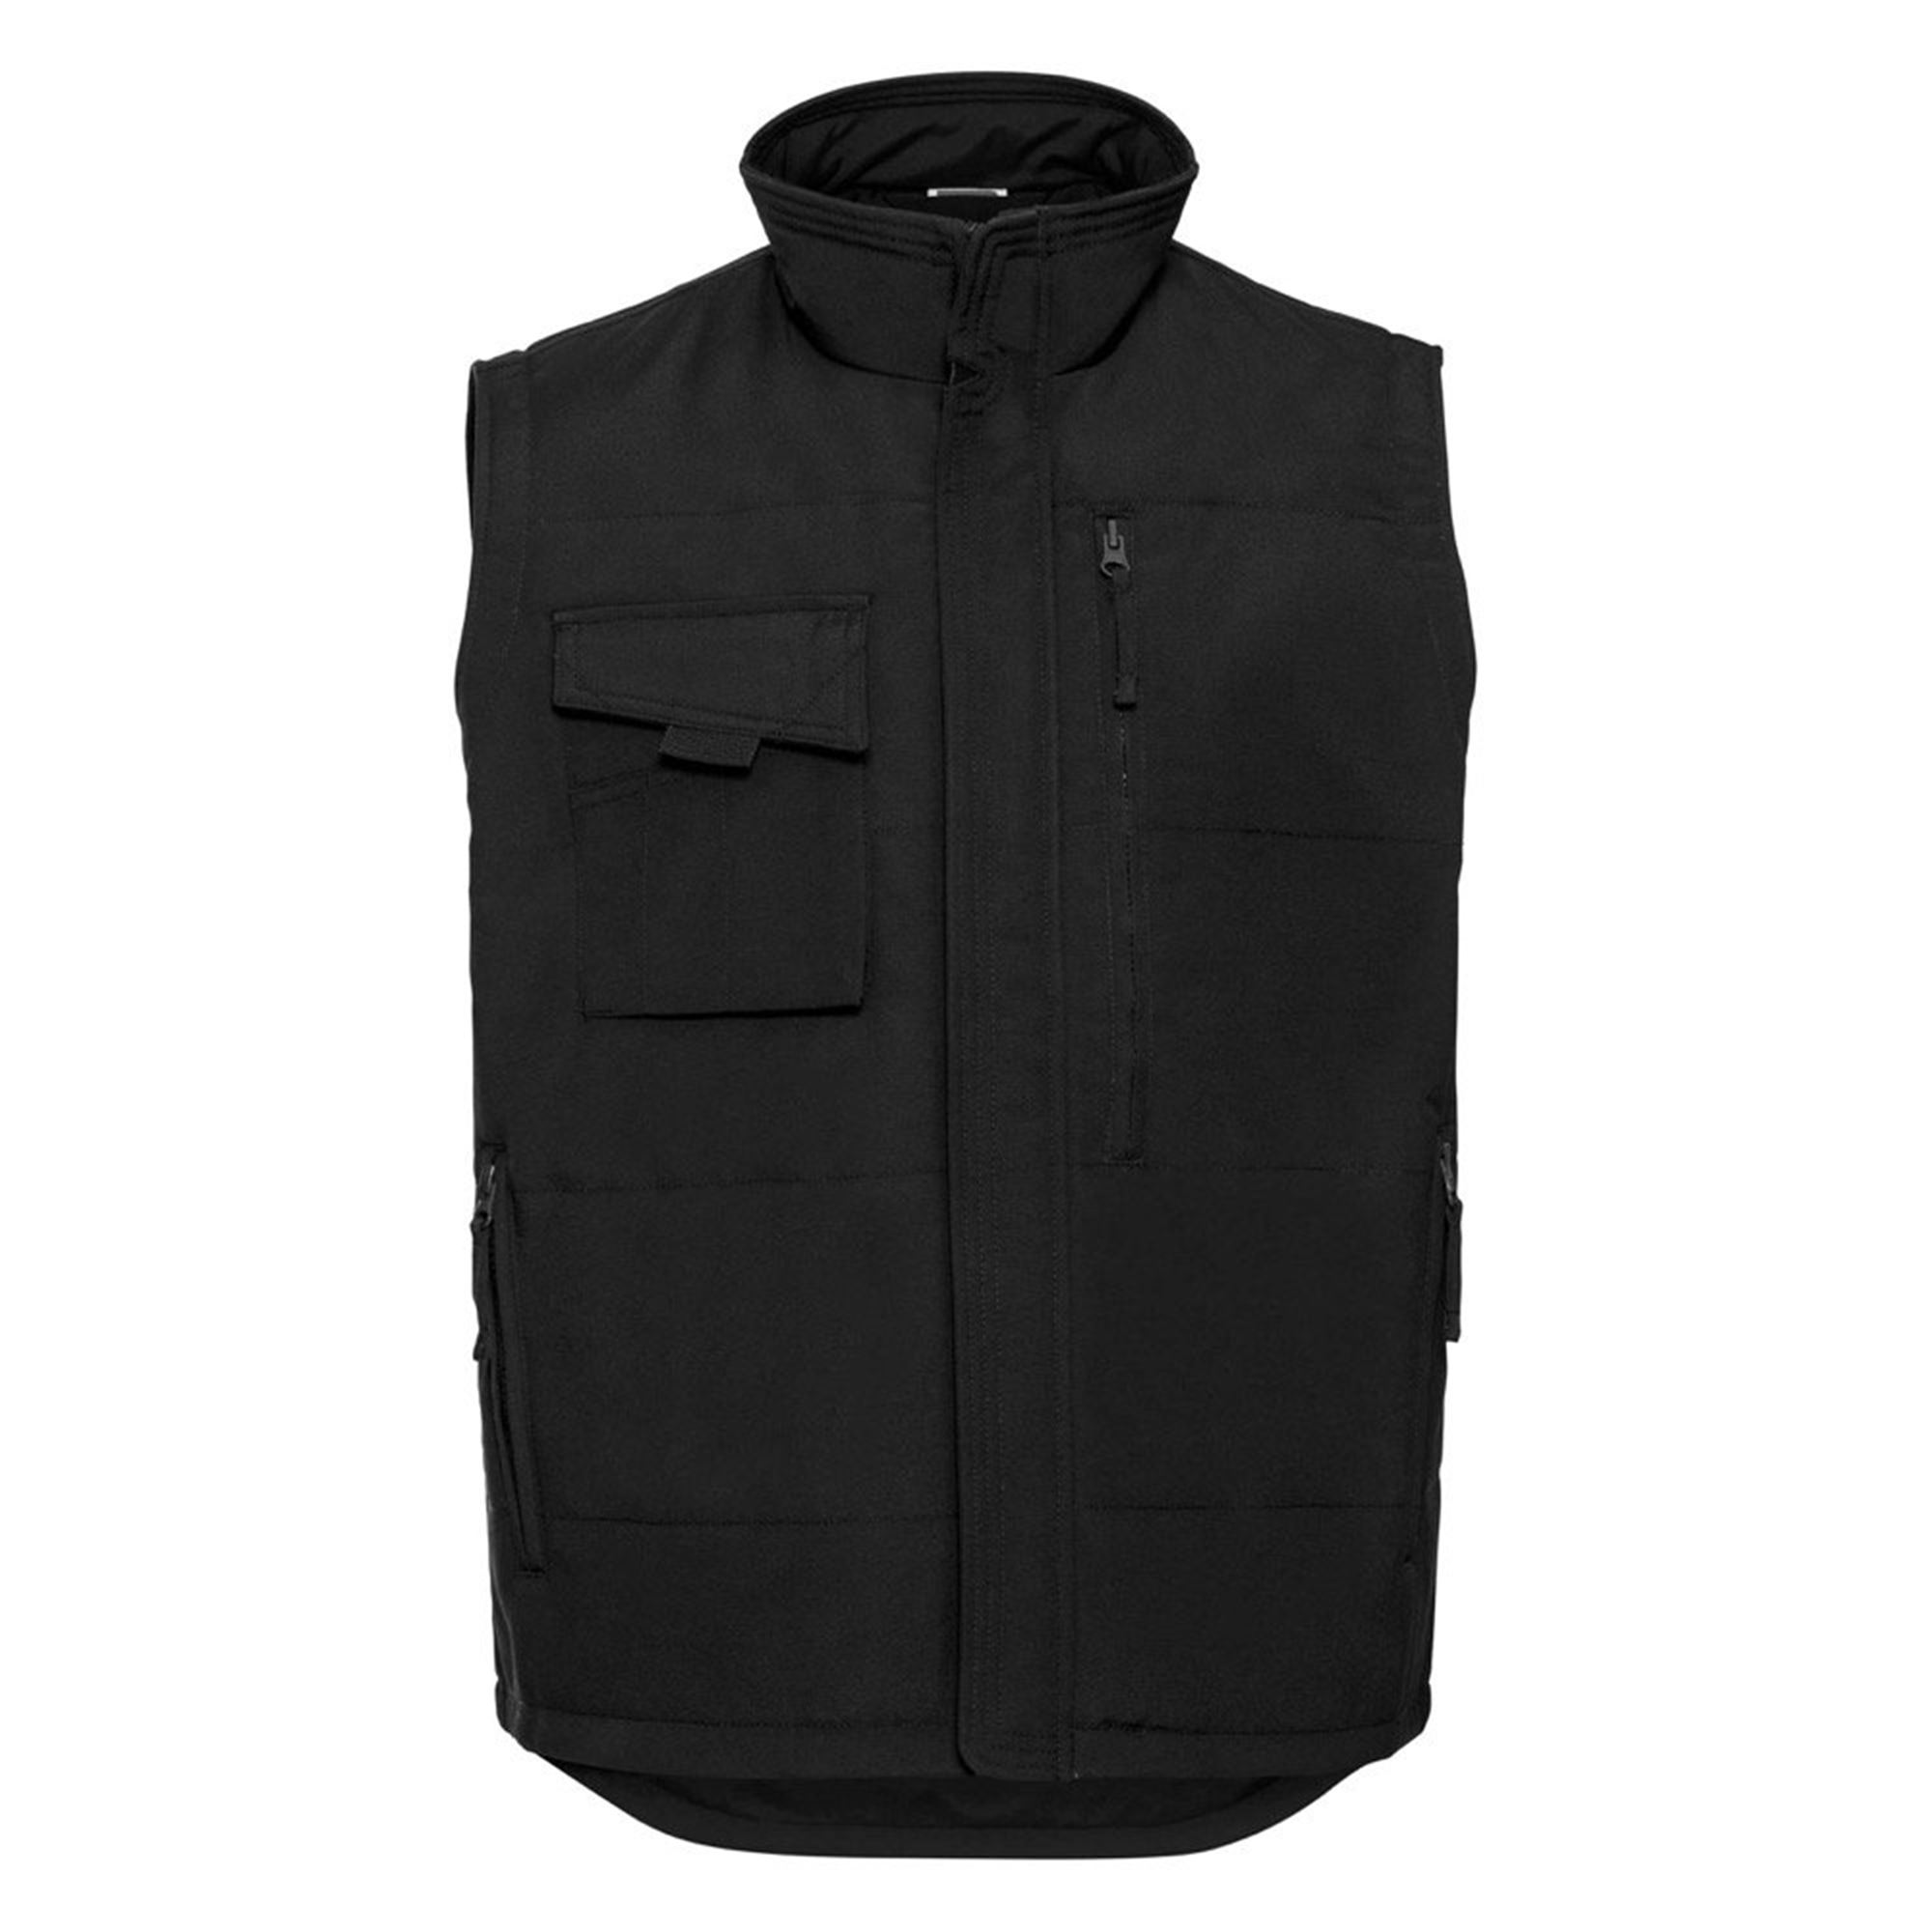 Russell 014M Workwear Gilet